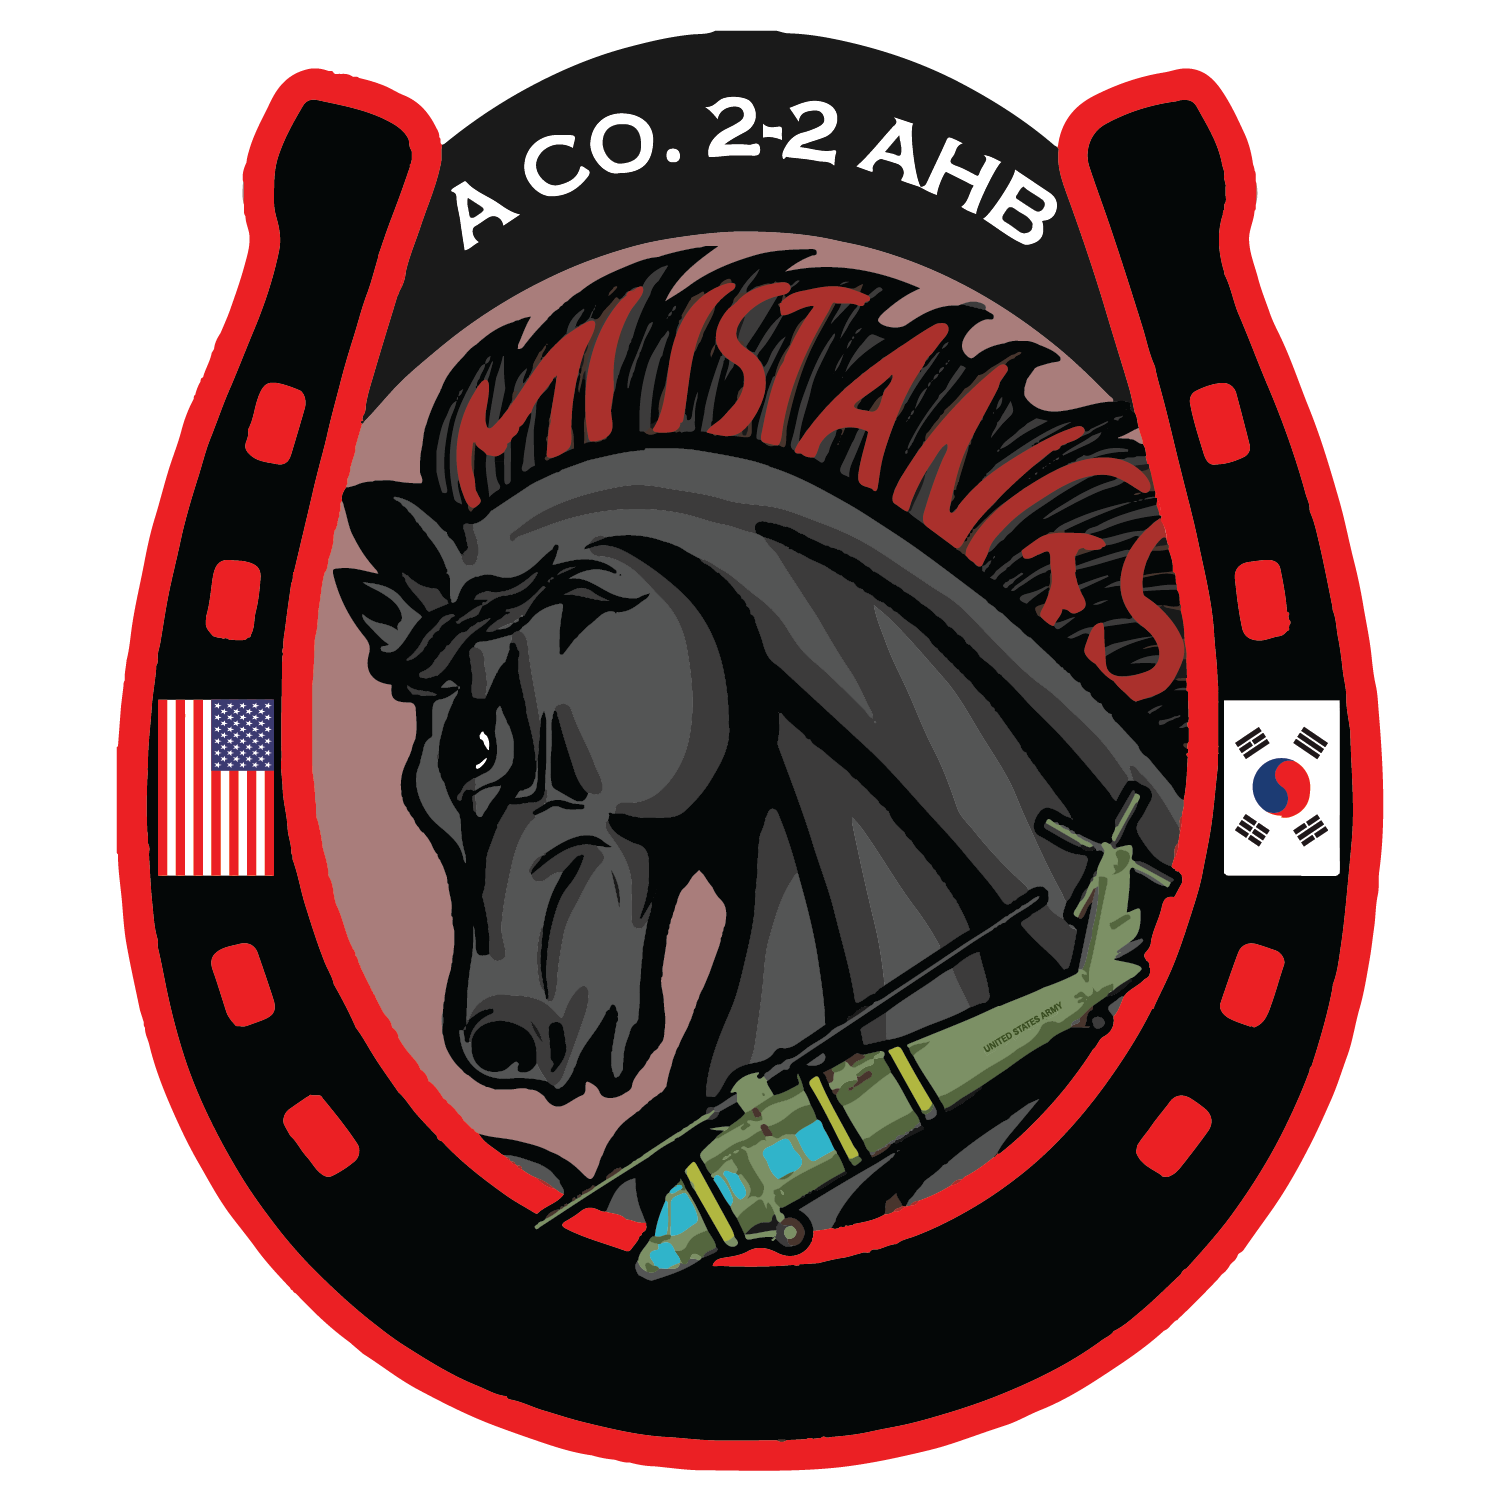 A Co, 2-2 AHB "Mustangs"